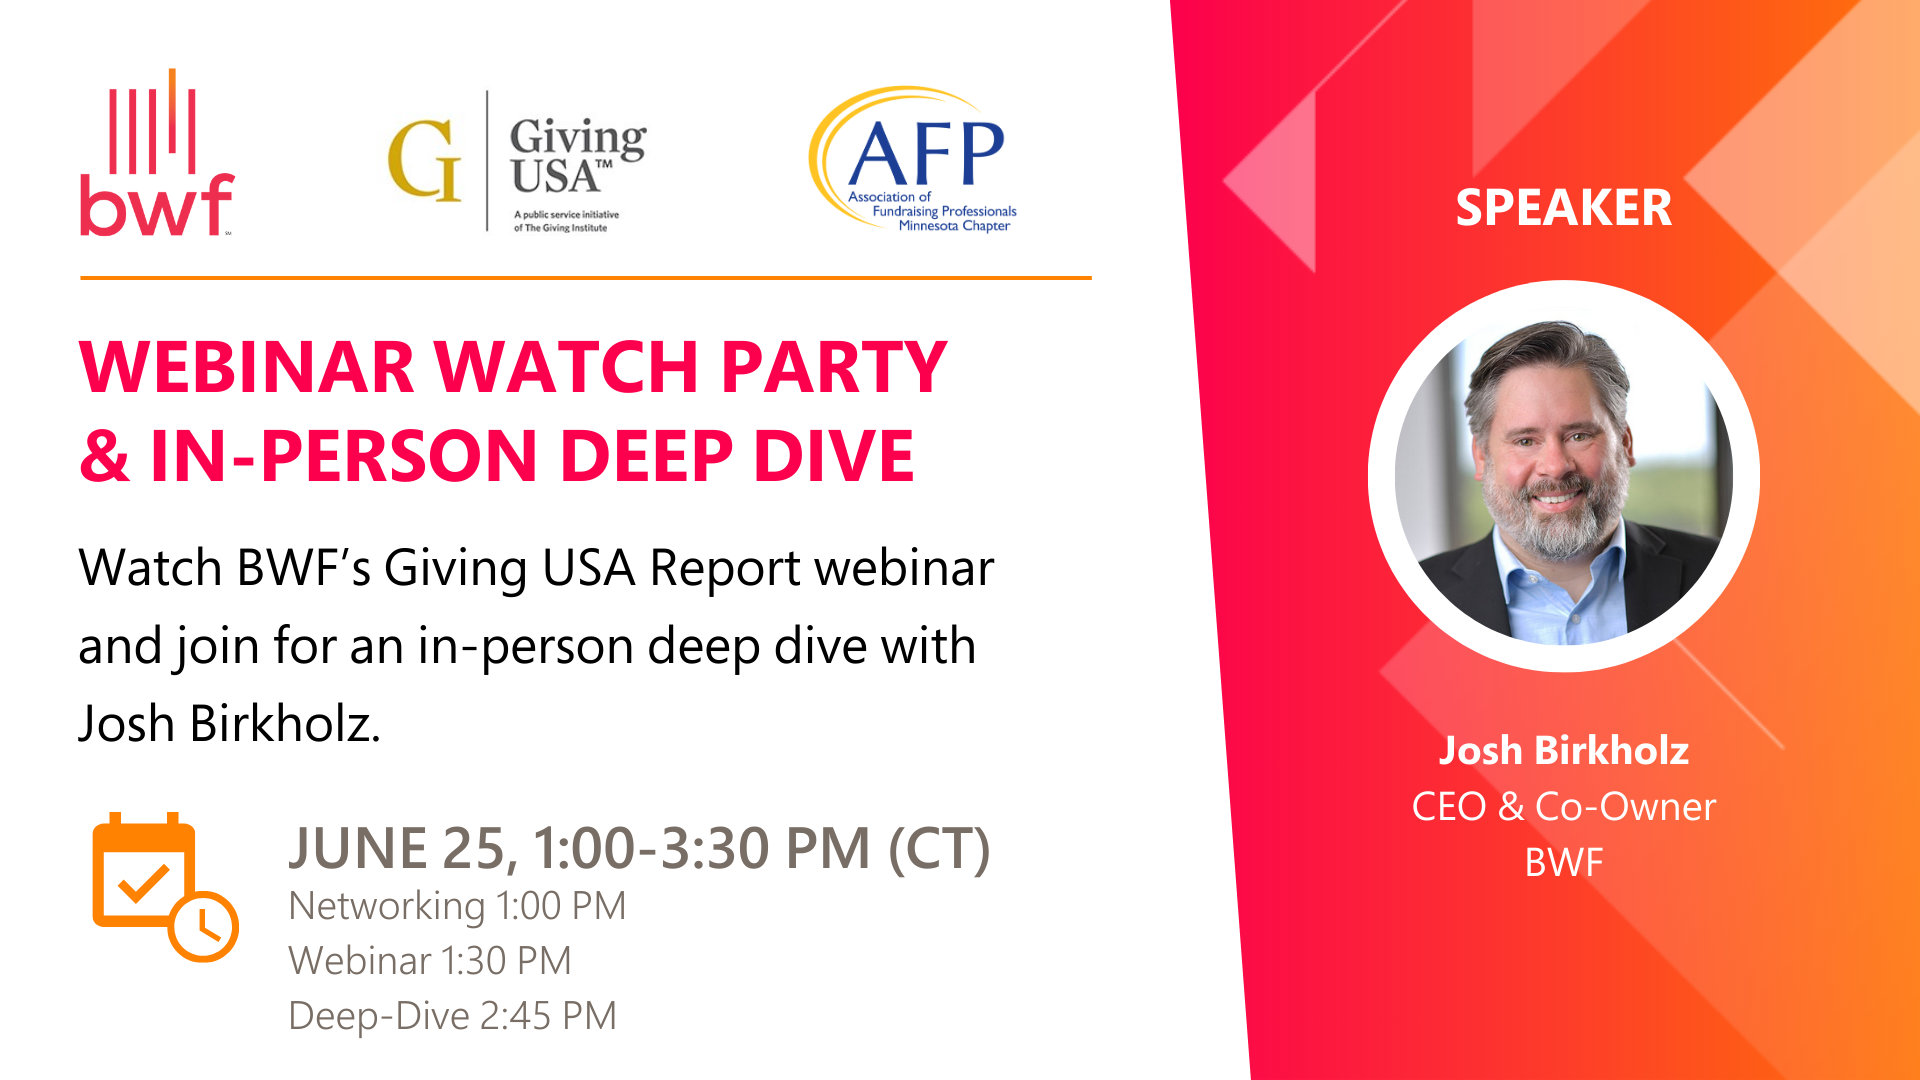 Giving USA Webinar Watch Party & In-Person Deep Dive